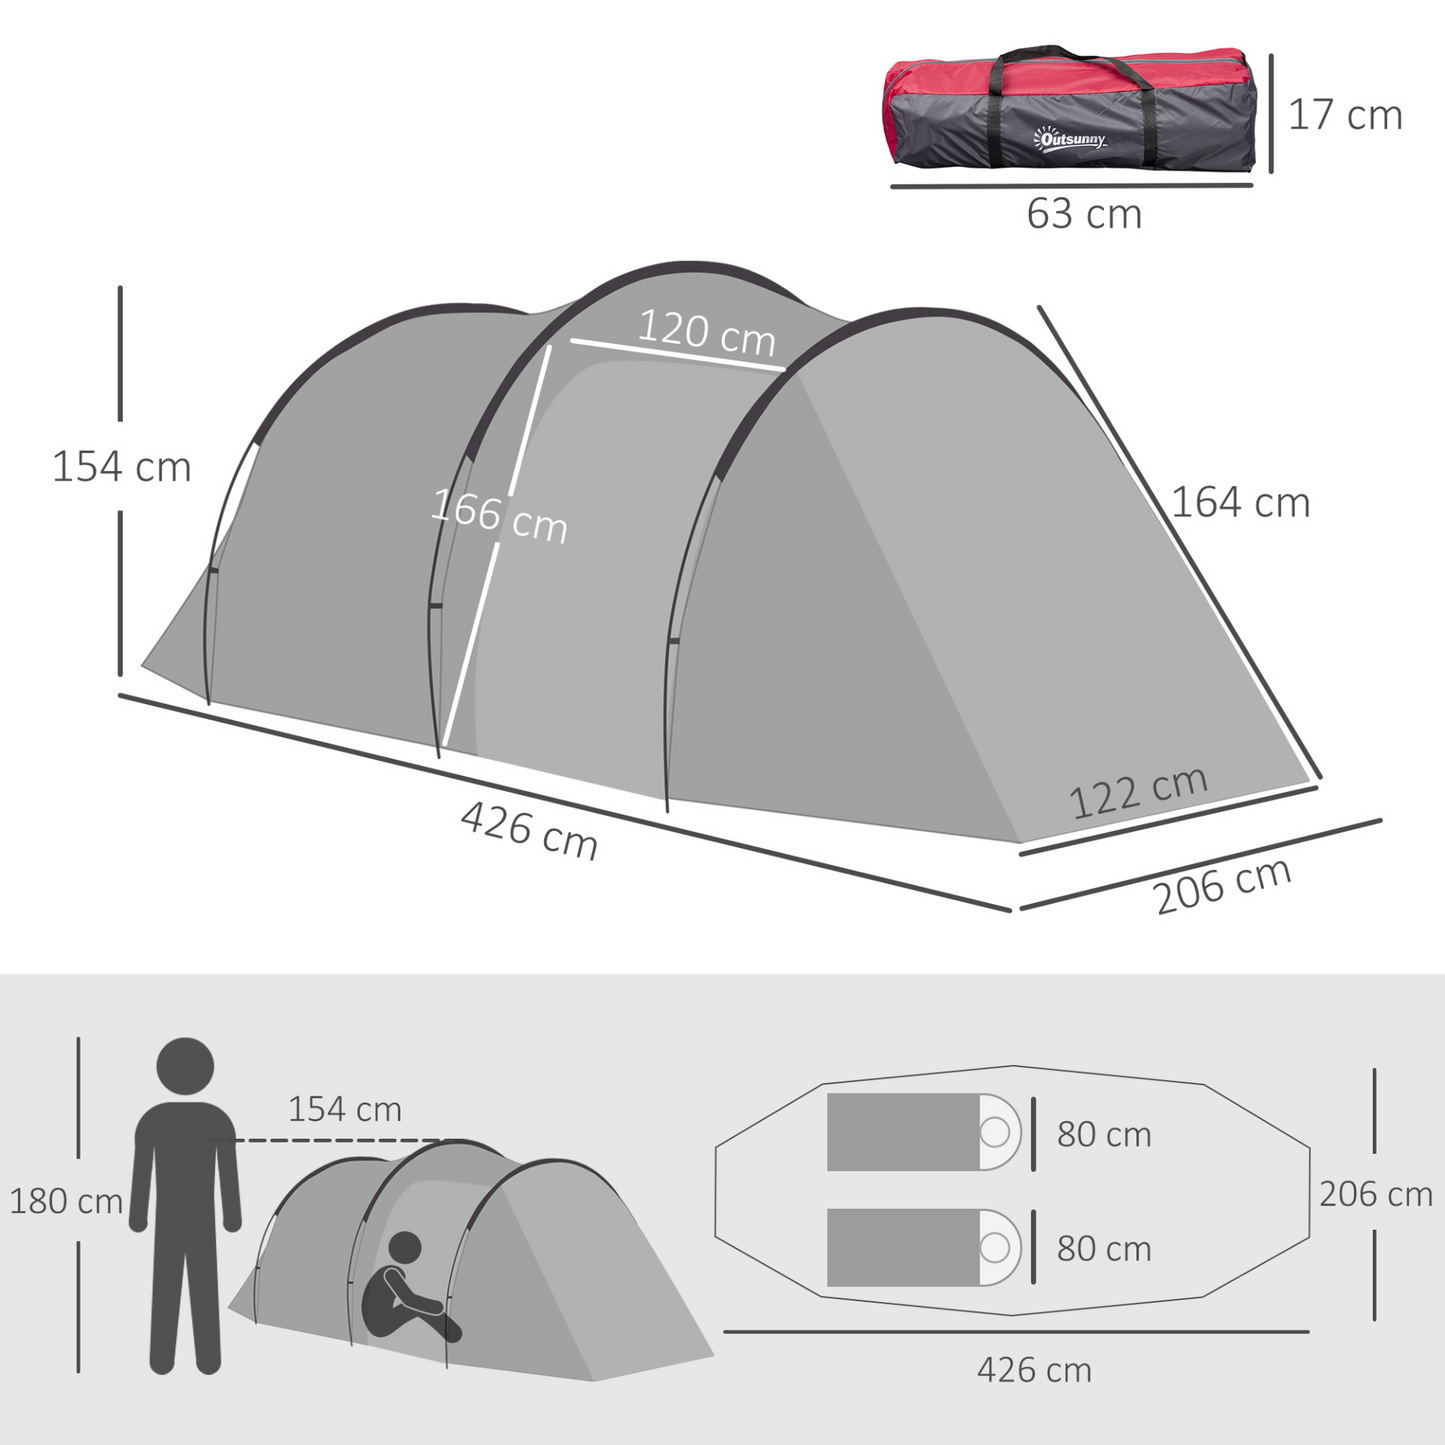 Outsunny 2-3 Man Tunnel Tents w/ Vestibule Camping Tent Porch Air Vents Rainfly Weather-Resistant Shelter Fishing Hiking Festival Shelter Home, Dark Grey